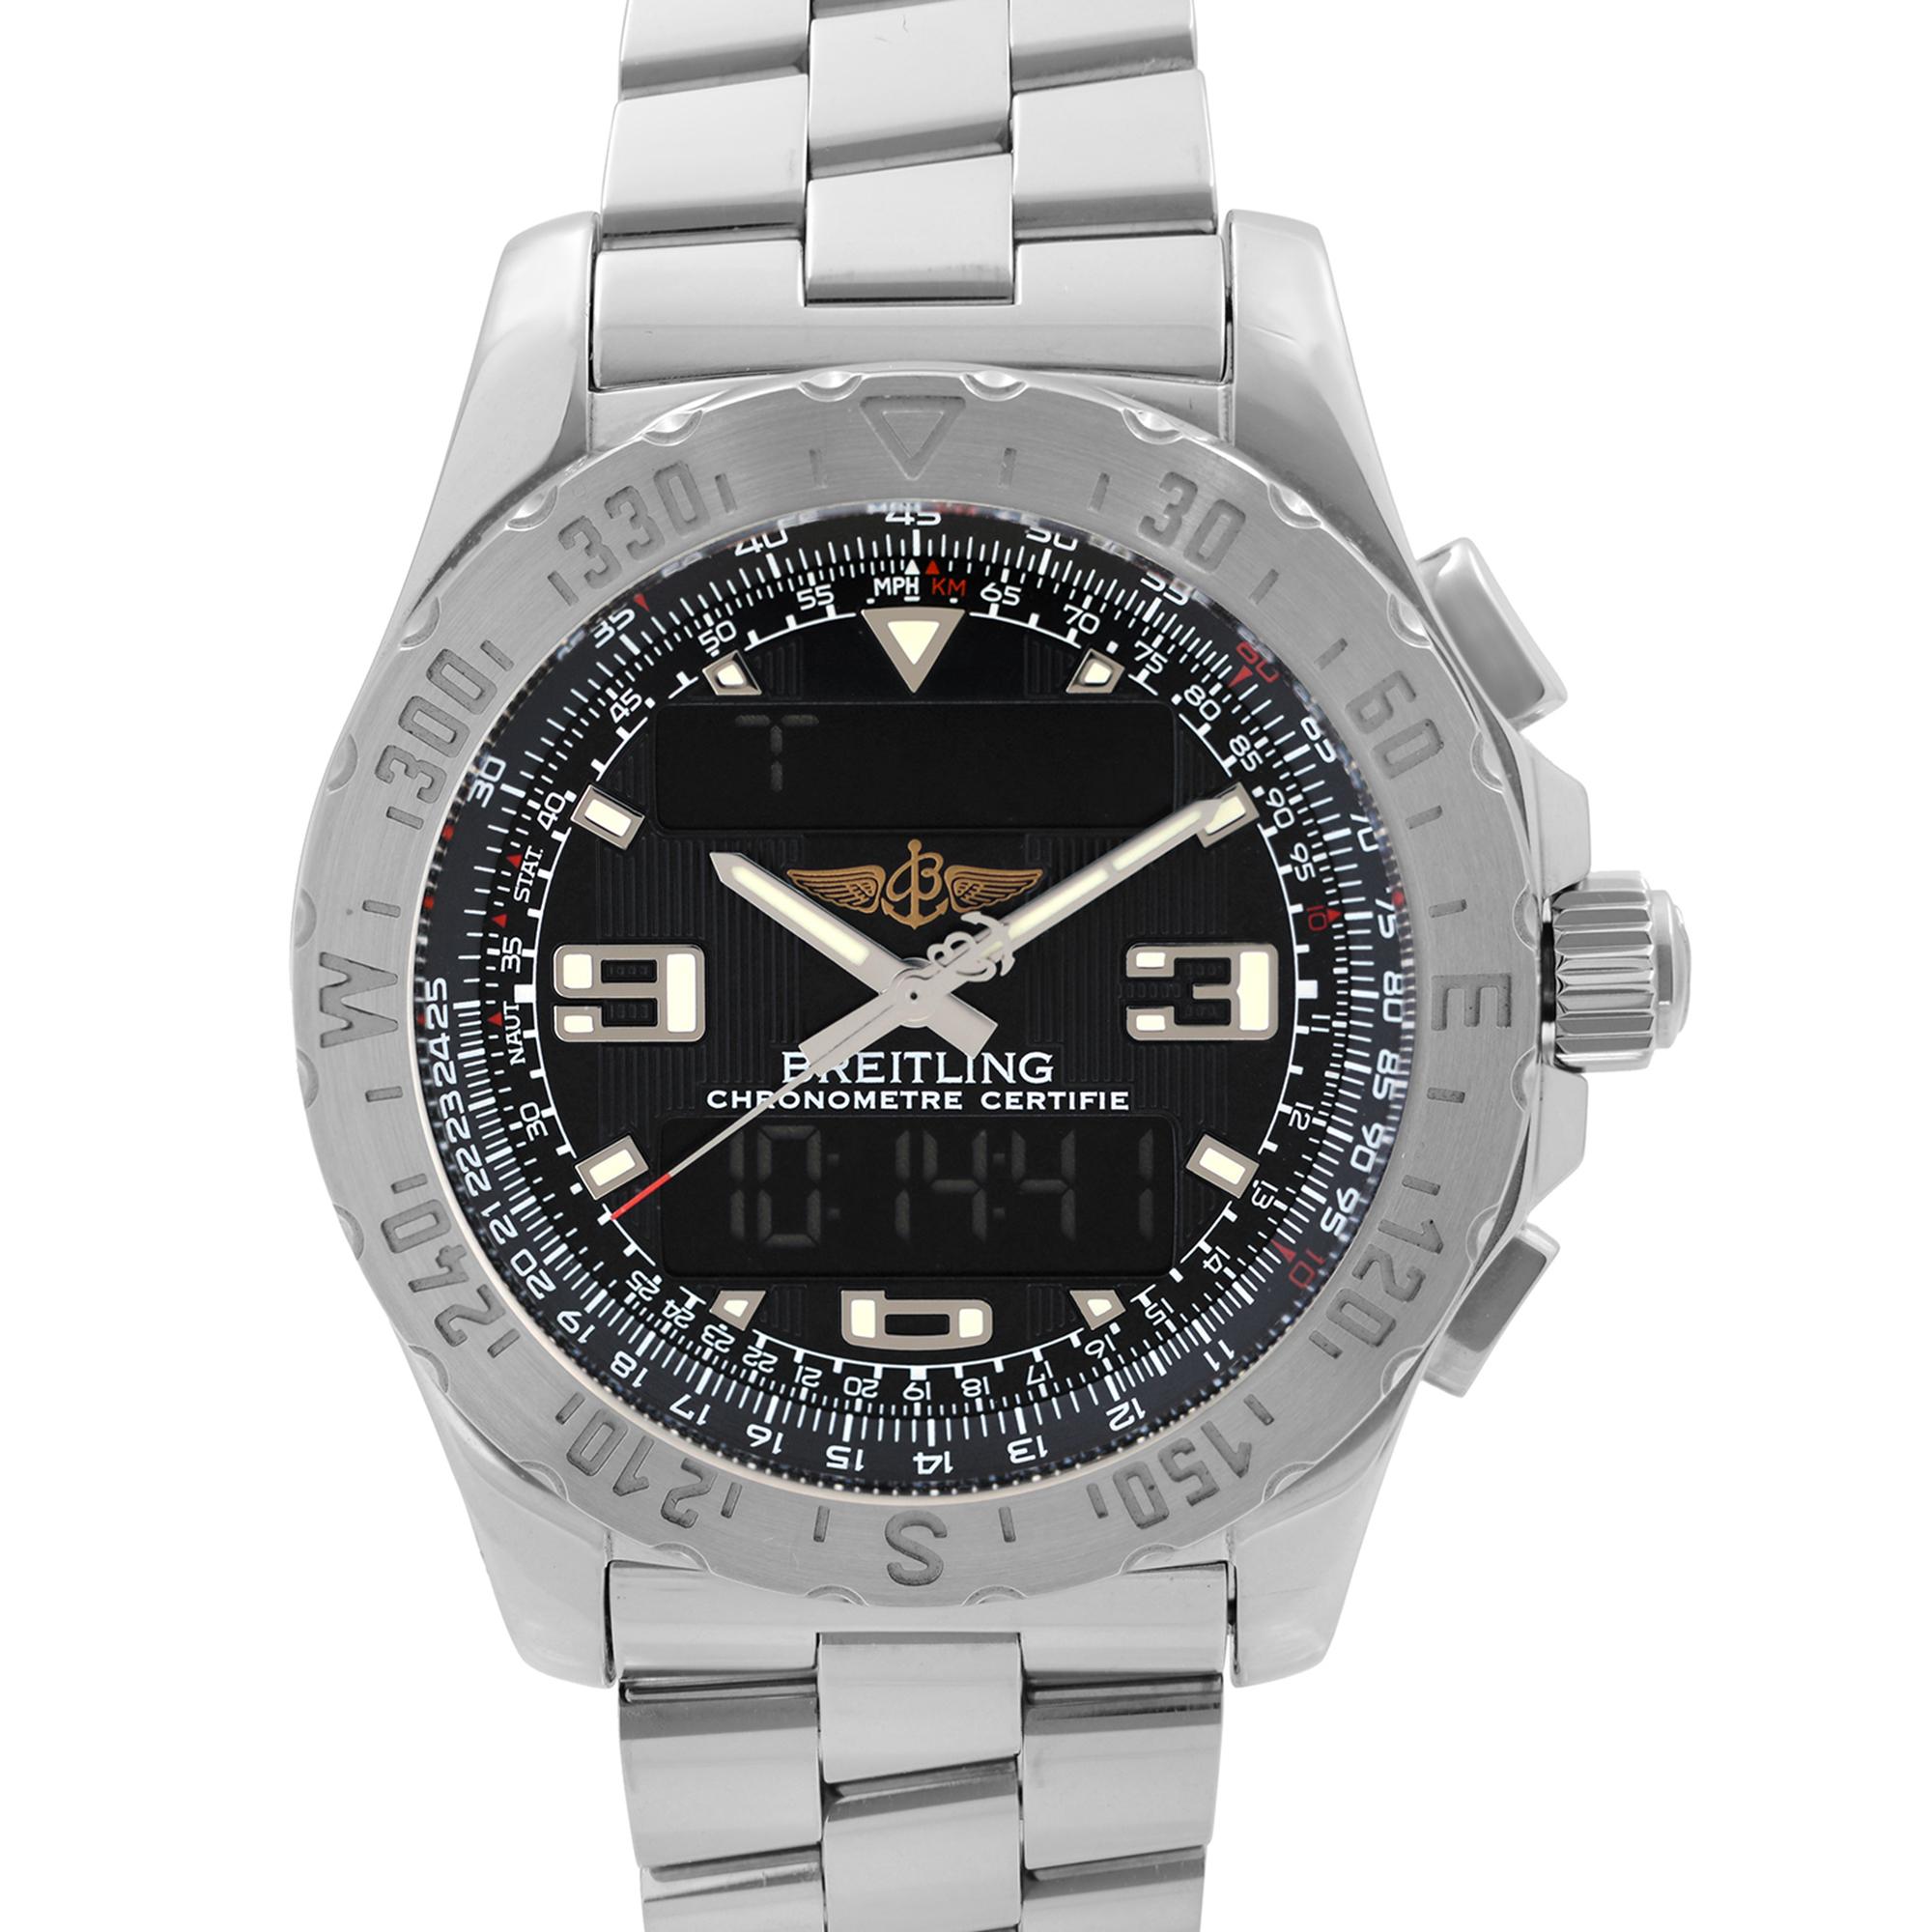 Pre-Owned Breitling Airwolf 43mm Stainless Steel Chronograph Gray Dial Men's Quartz Watch A78363. The Watch is powered by an Automatic Movement. This Beautiful Timepiece Features: Polished Stainless Steel Round Case and Steel Bracelet.